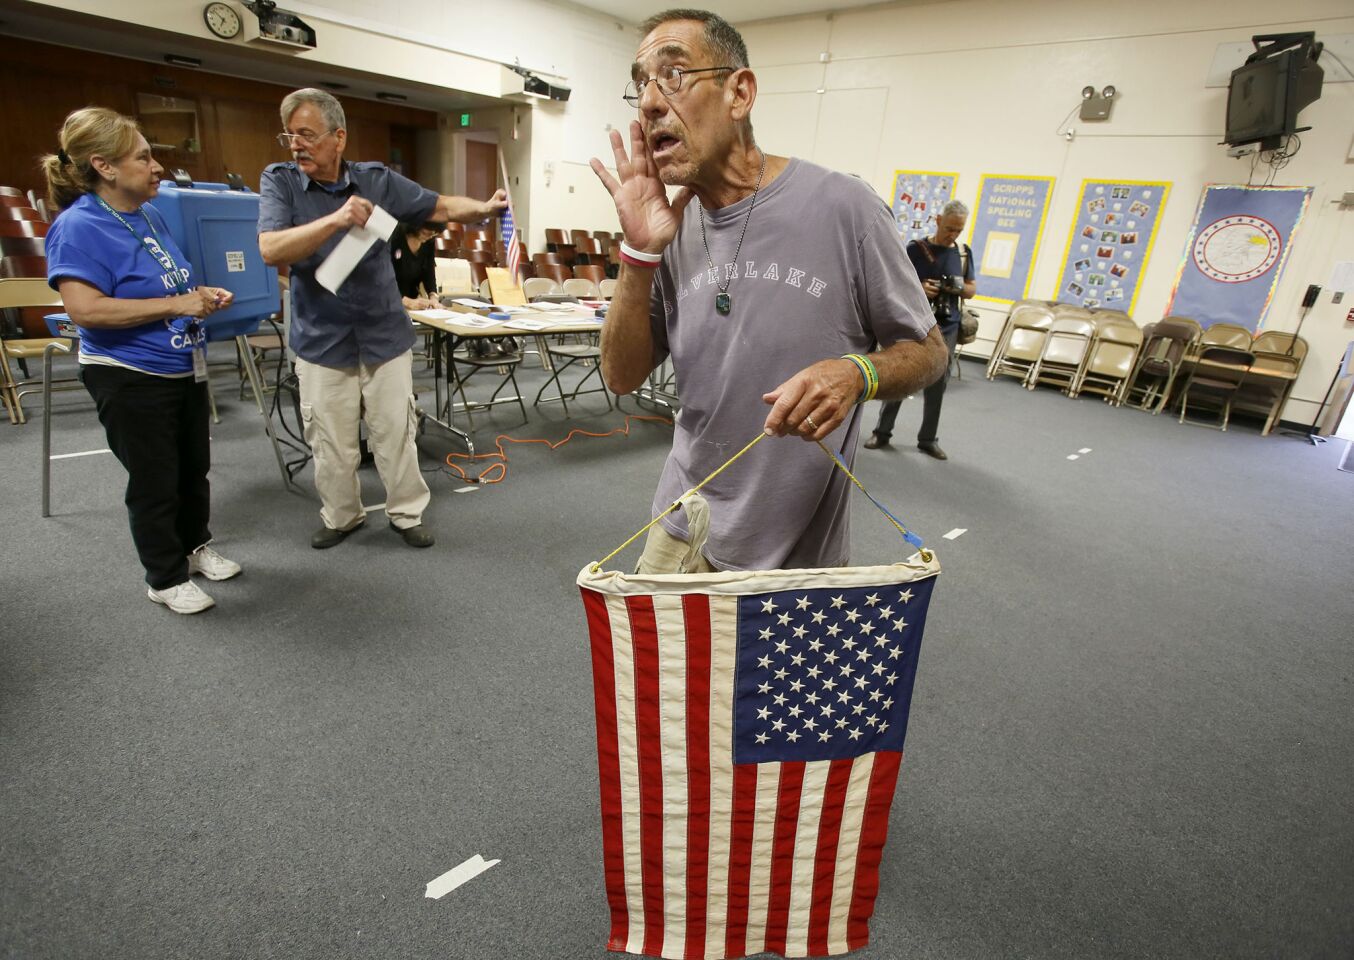 L.A. goes to the polls